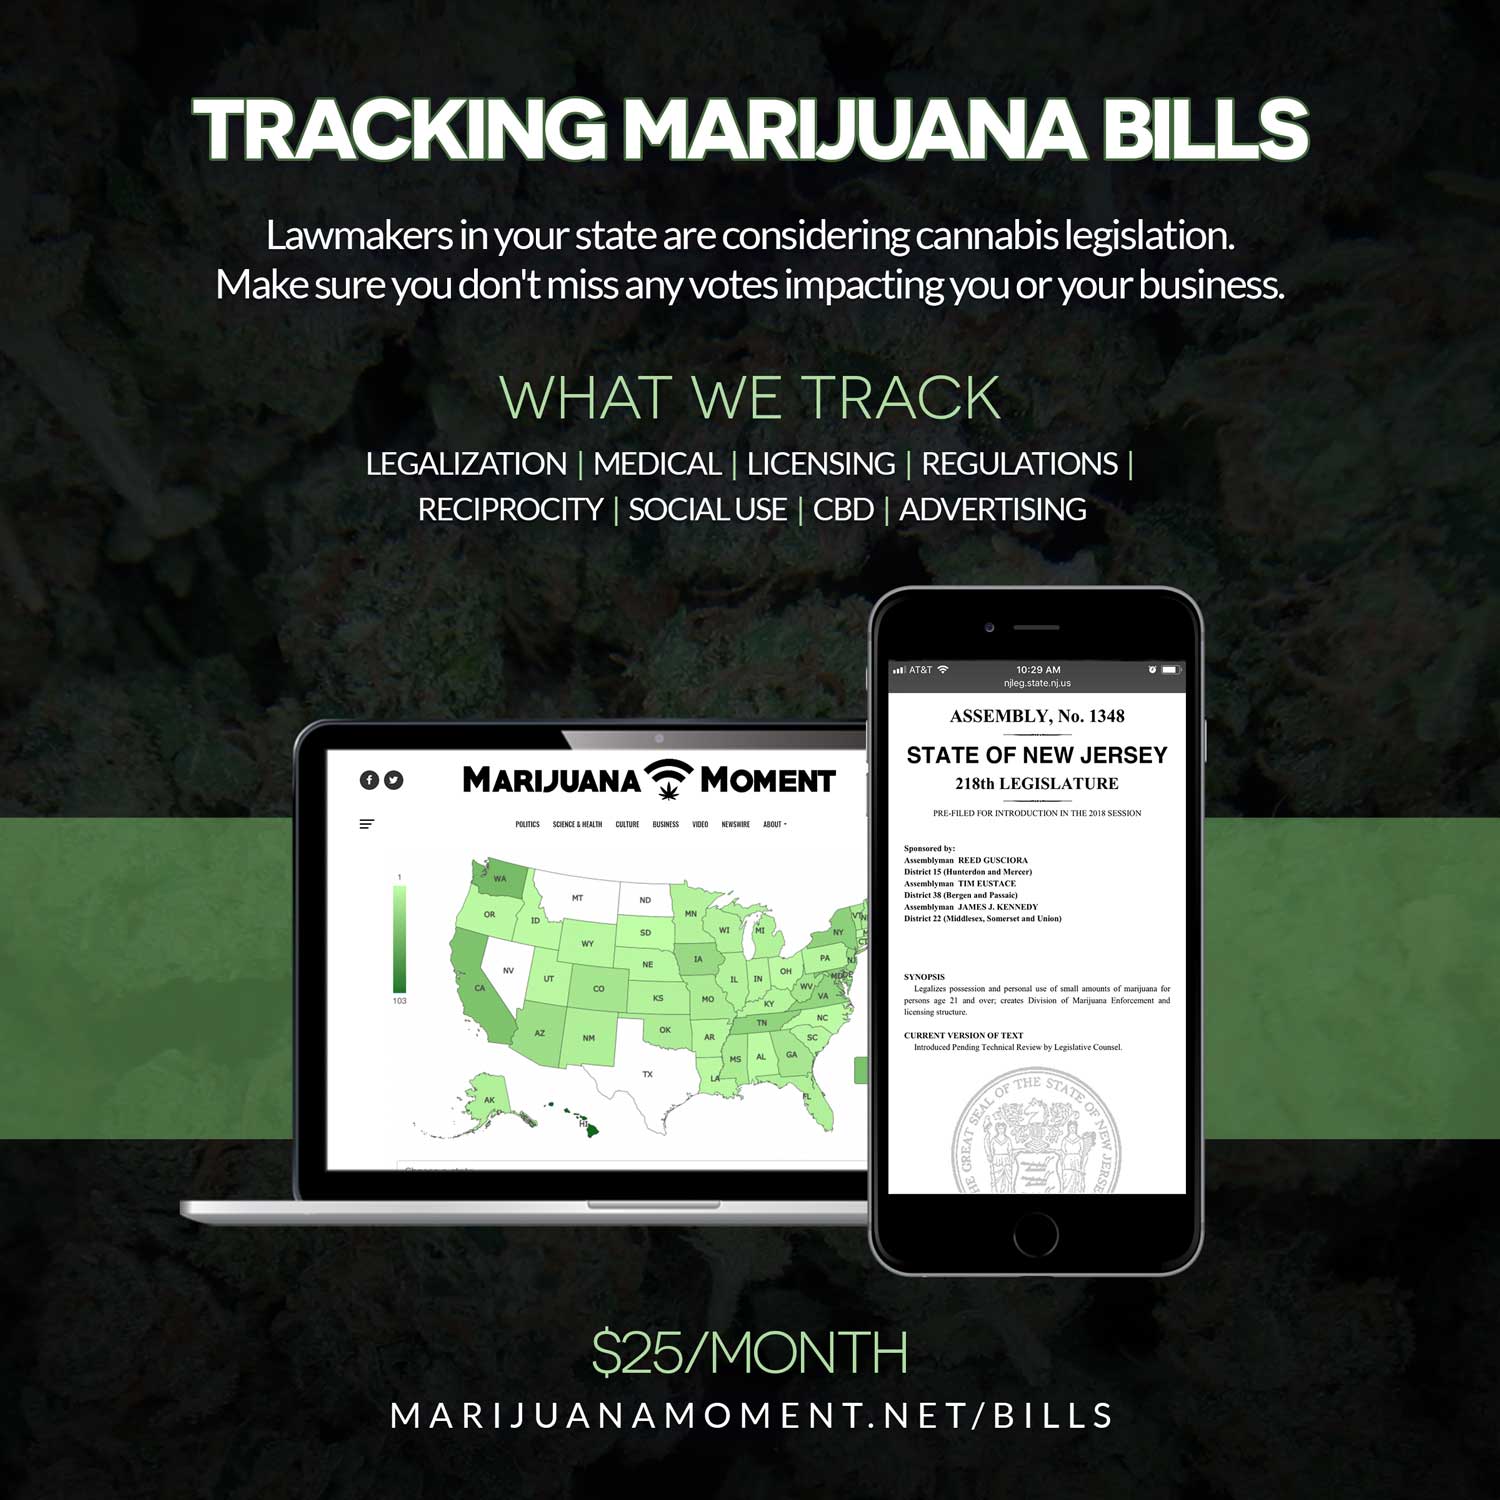 New York Governor Pushes Big Tech To ‘Step Up’ By Removing Illicit Marijuana Shop Listings